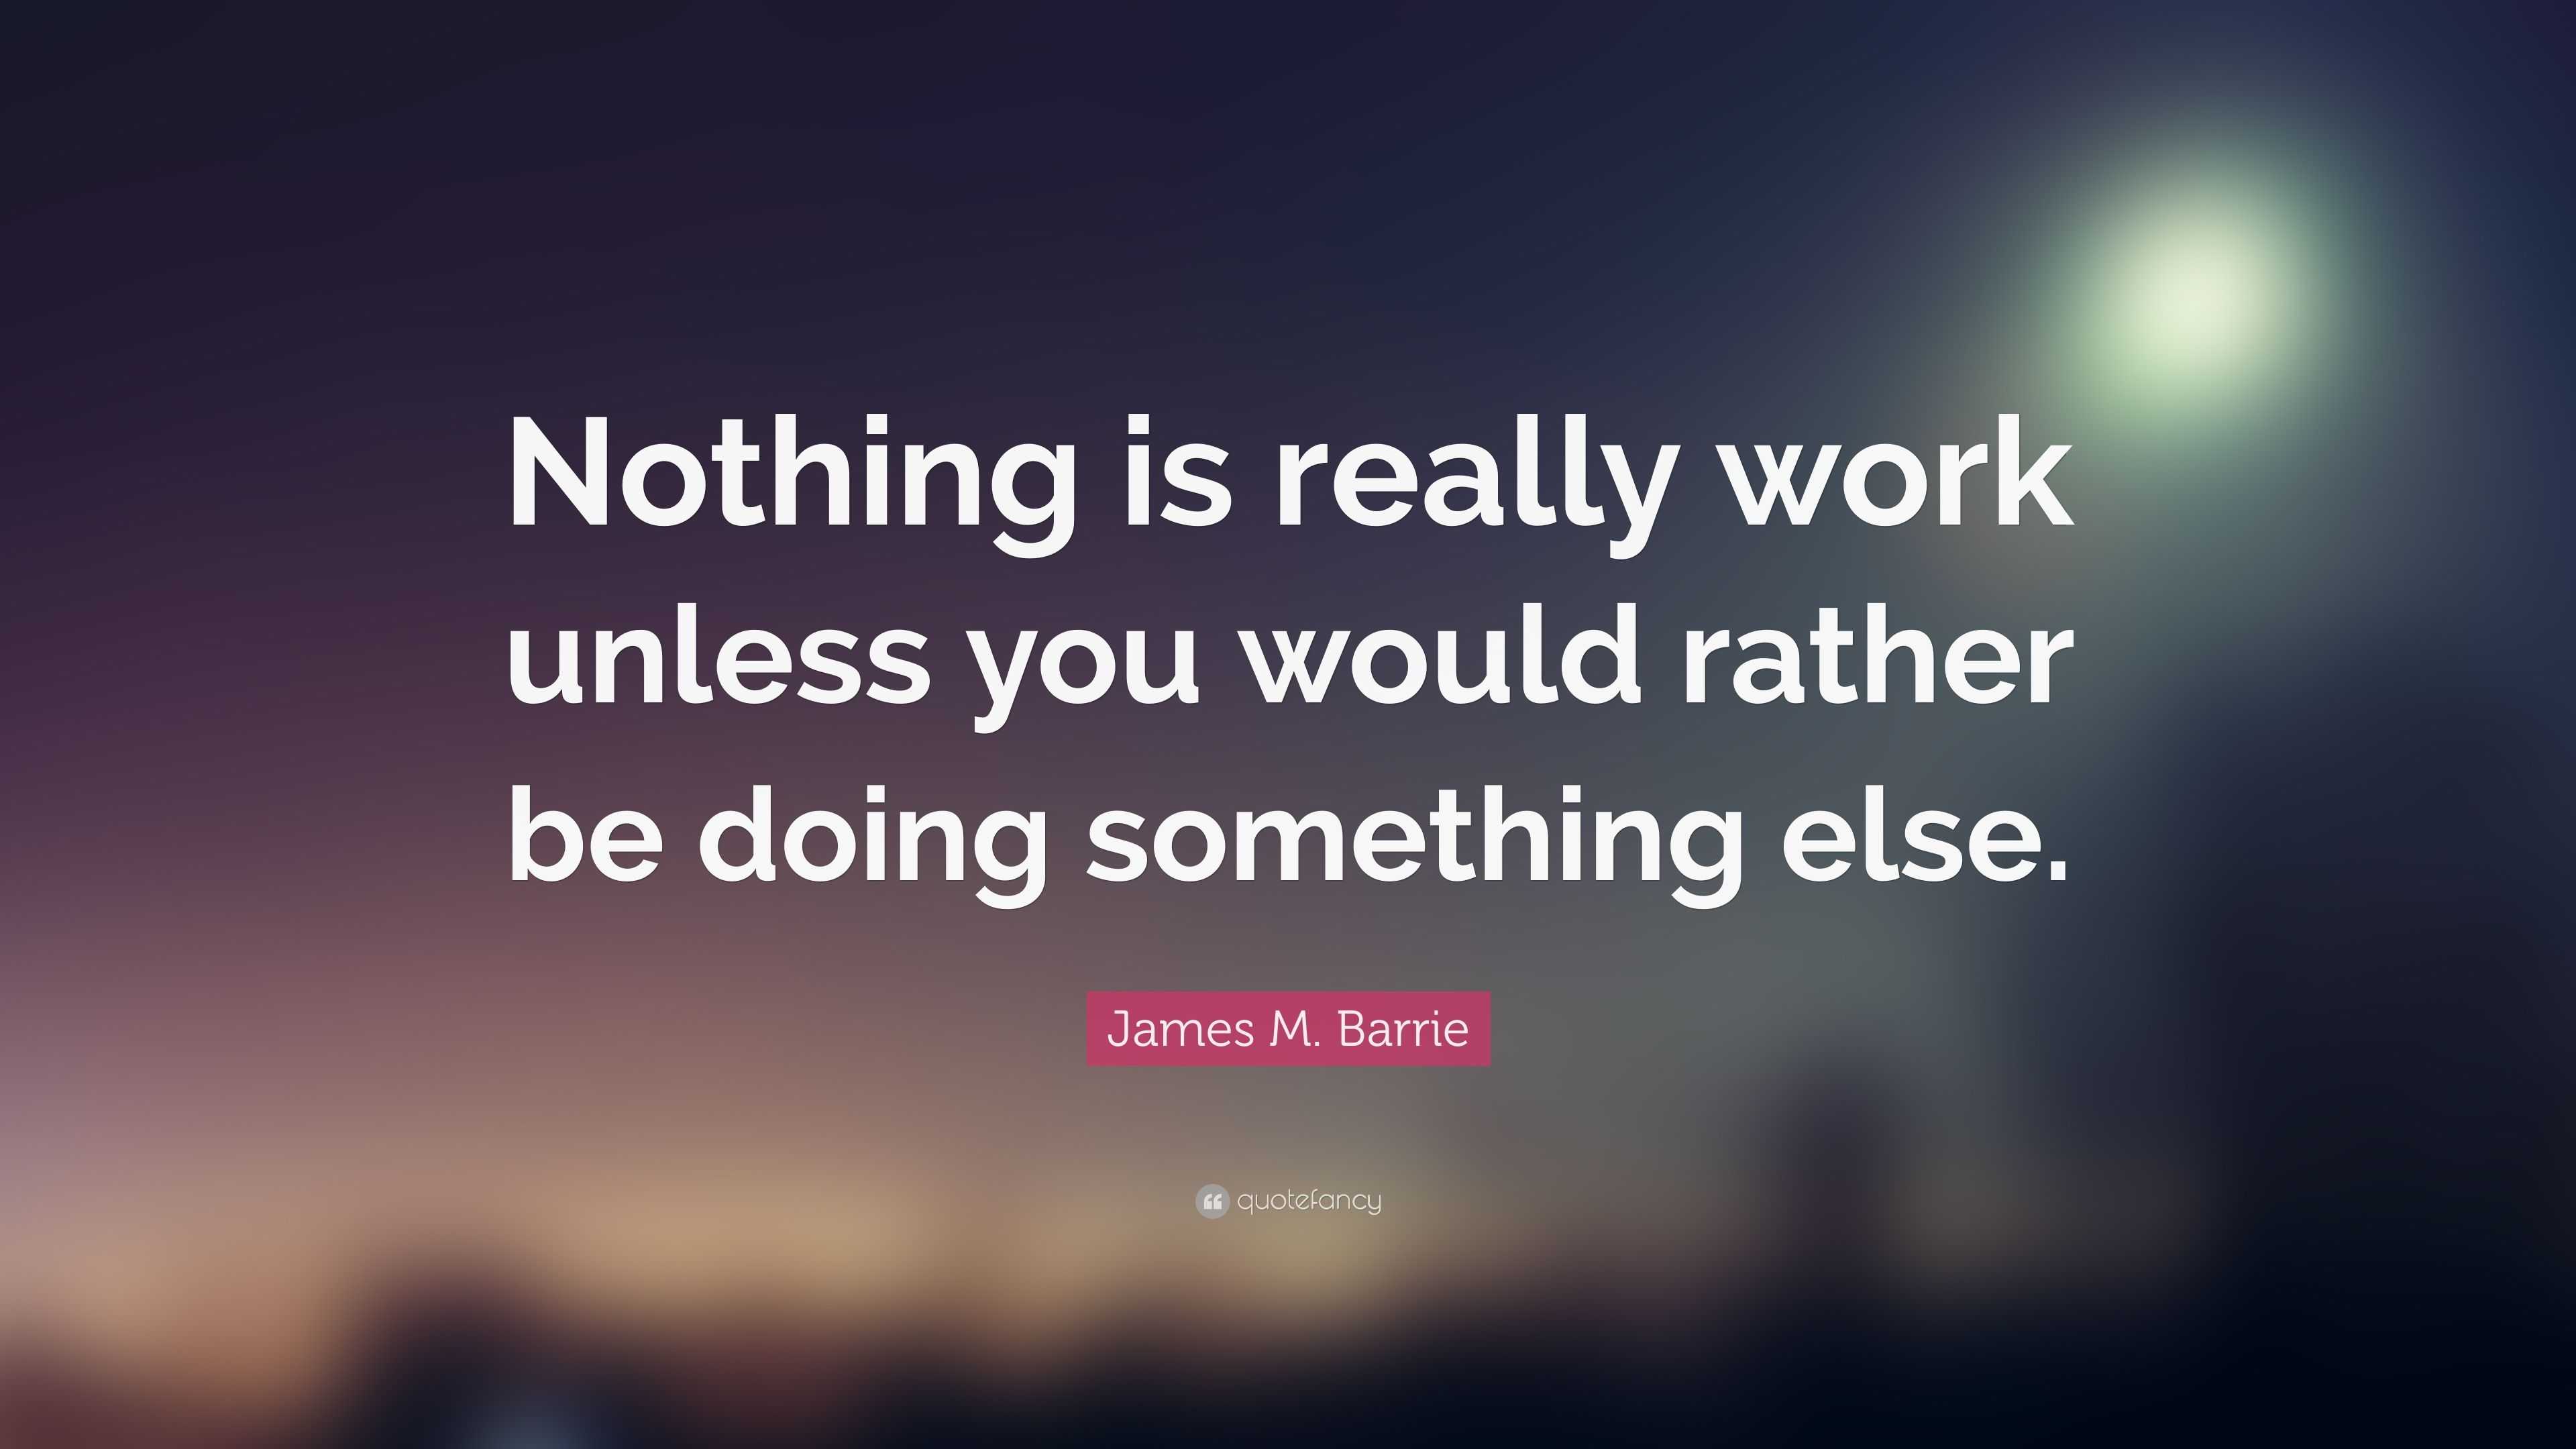 James M. Barrie Quote: “Nothing is really work unless you would rather ...